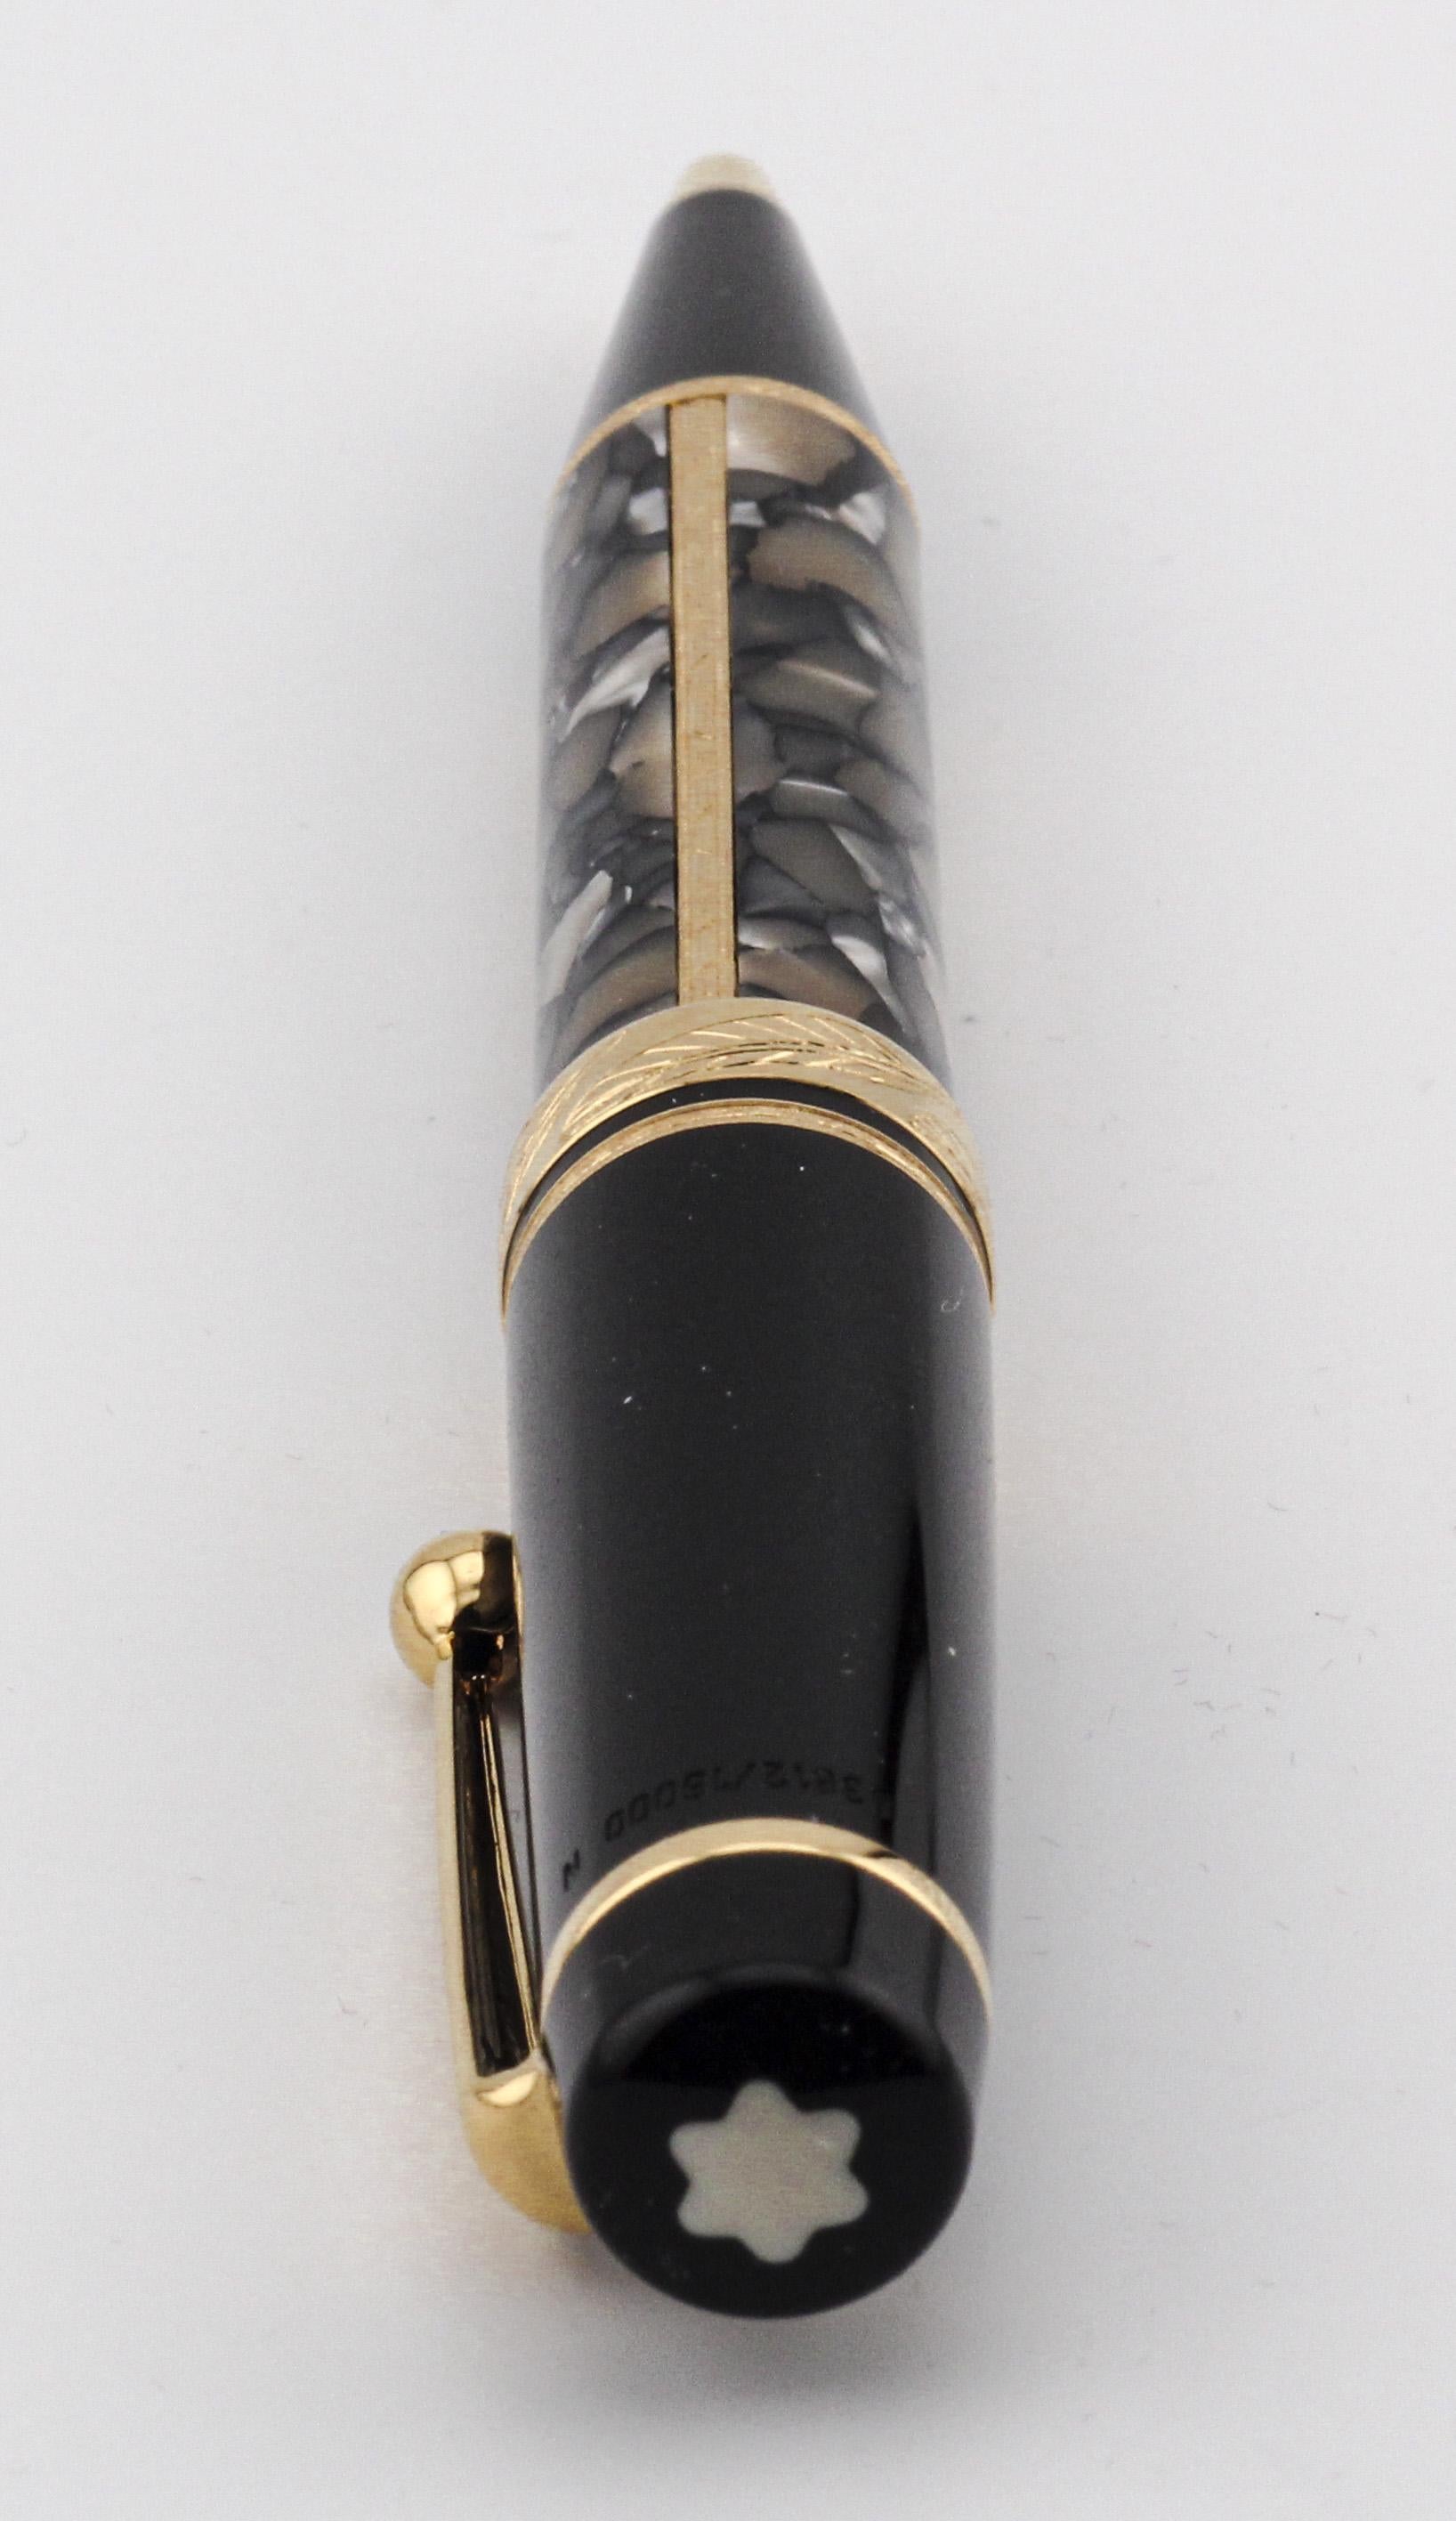 The Limited Edition Montblanc Alexander Dumas Writer Series Ballpoint Pen is a tribute to the prolific and beloved French novelist, playwright, and creator of timeless literary classics such as 